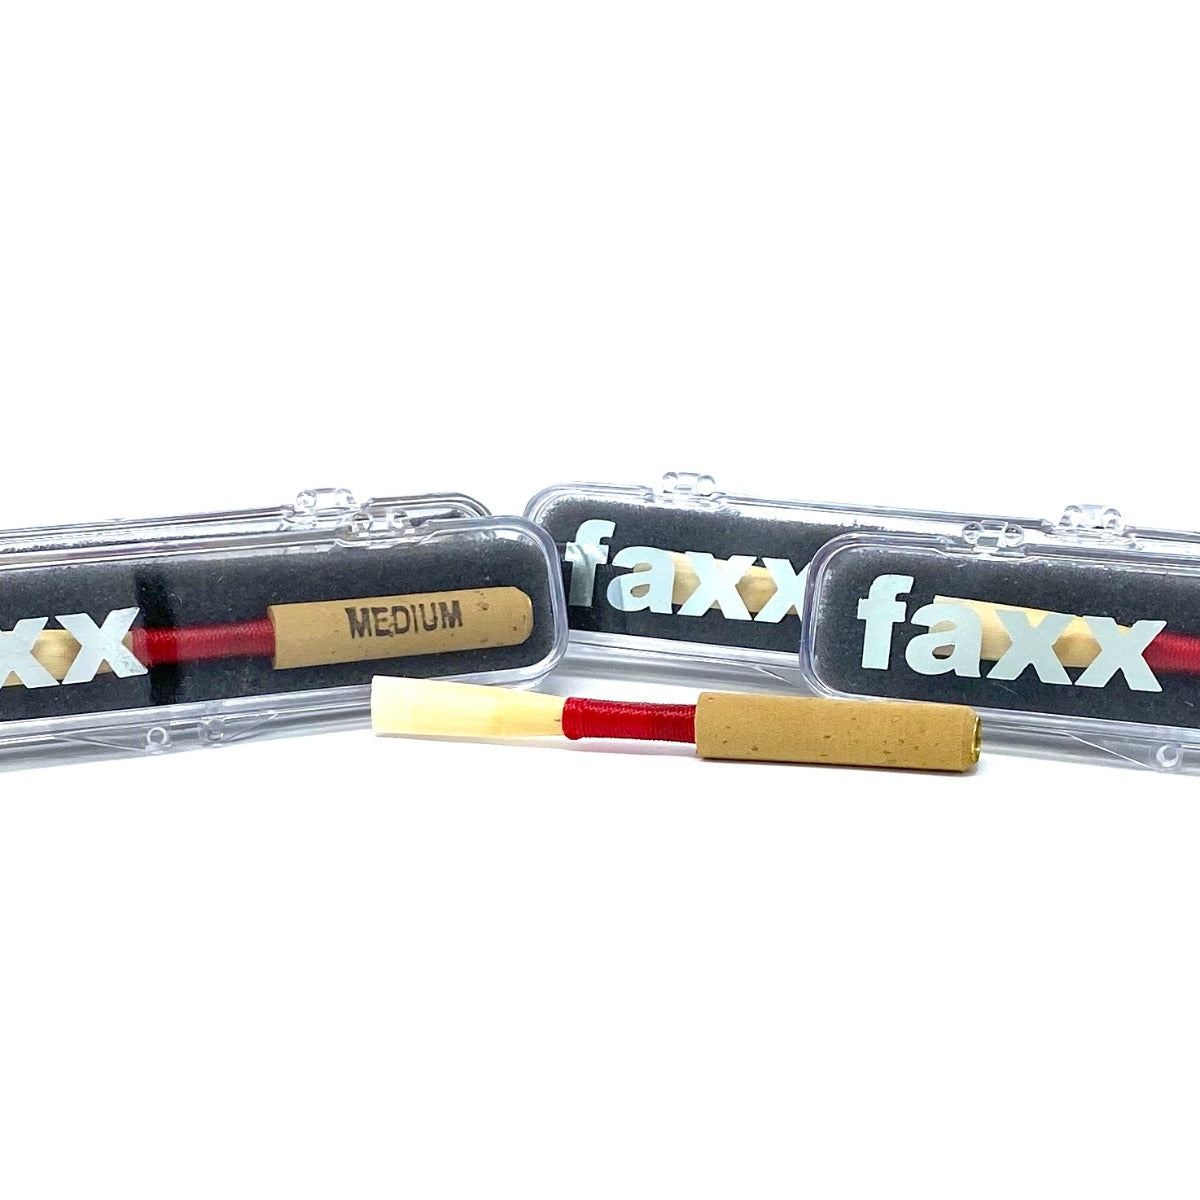 Faxx Oboe Reeds